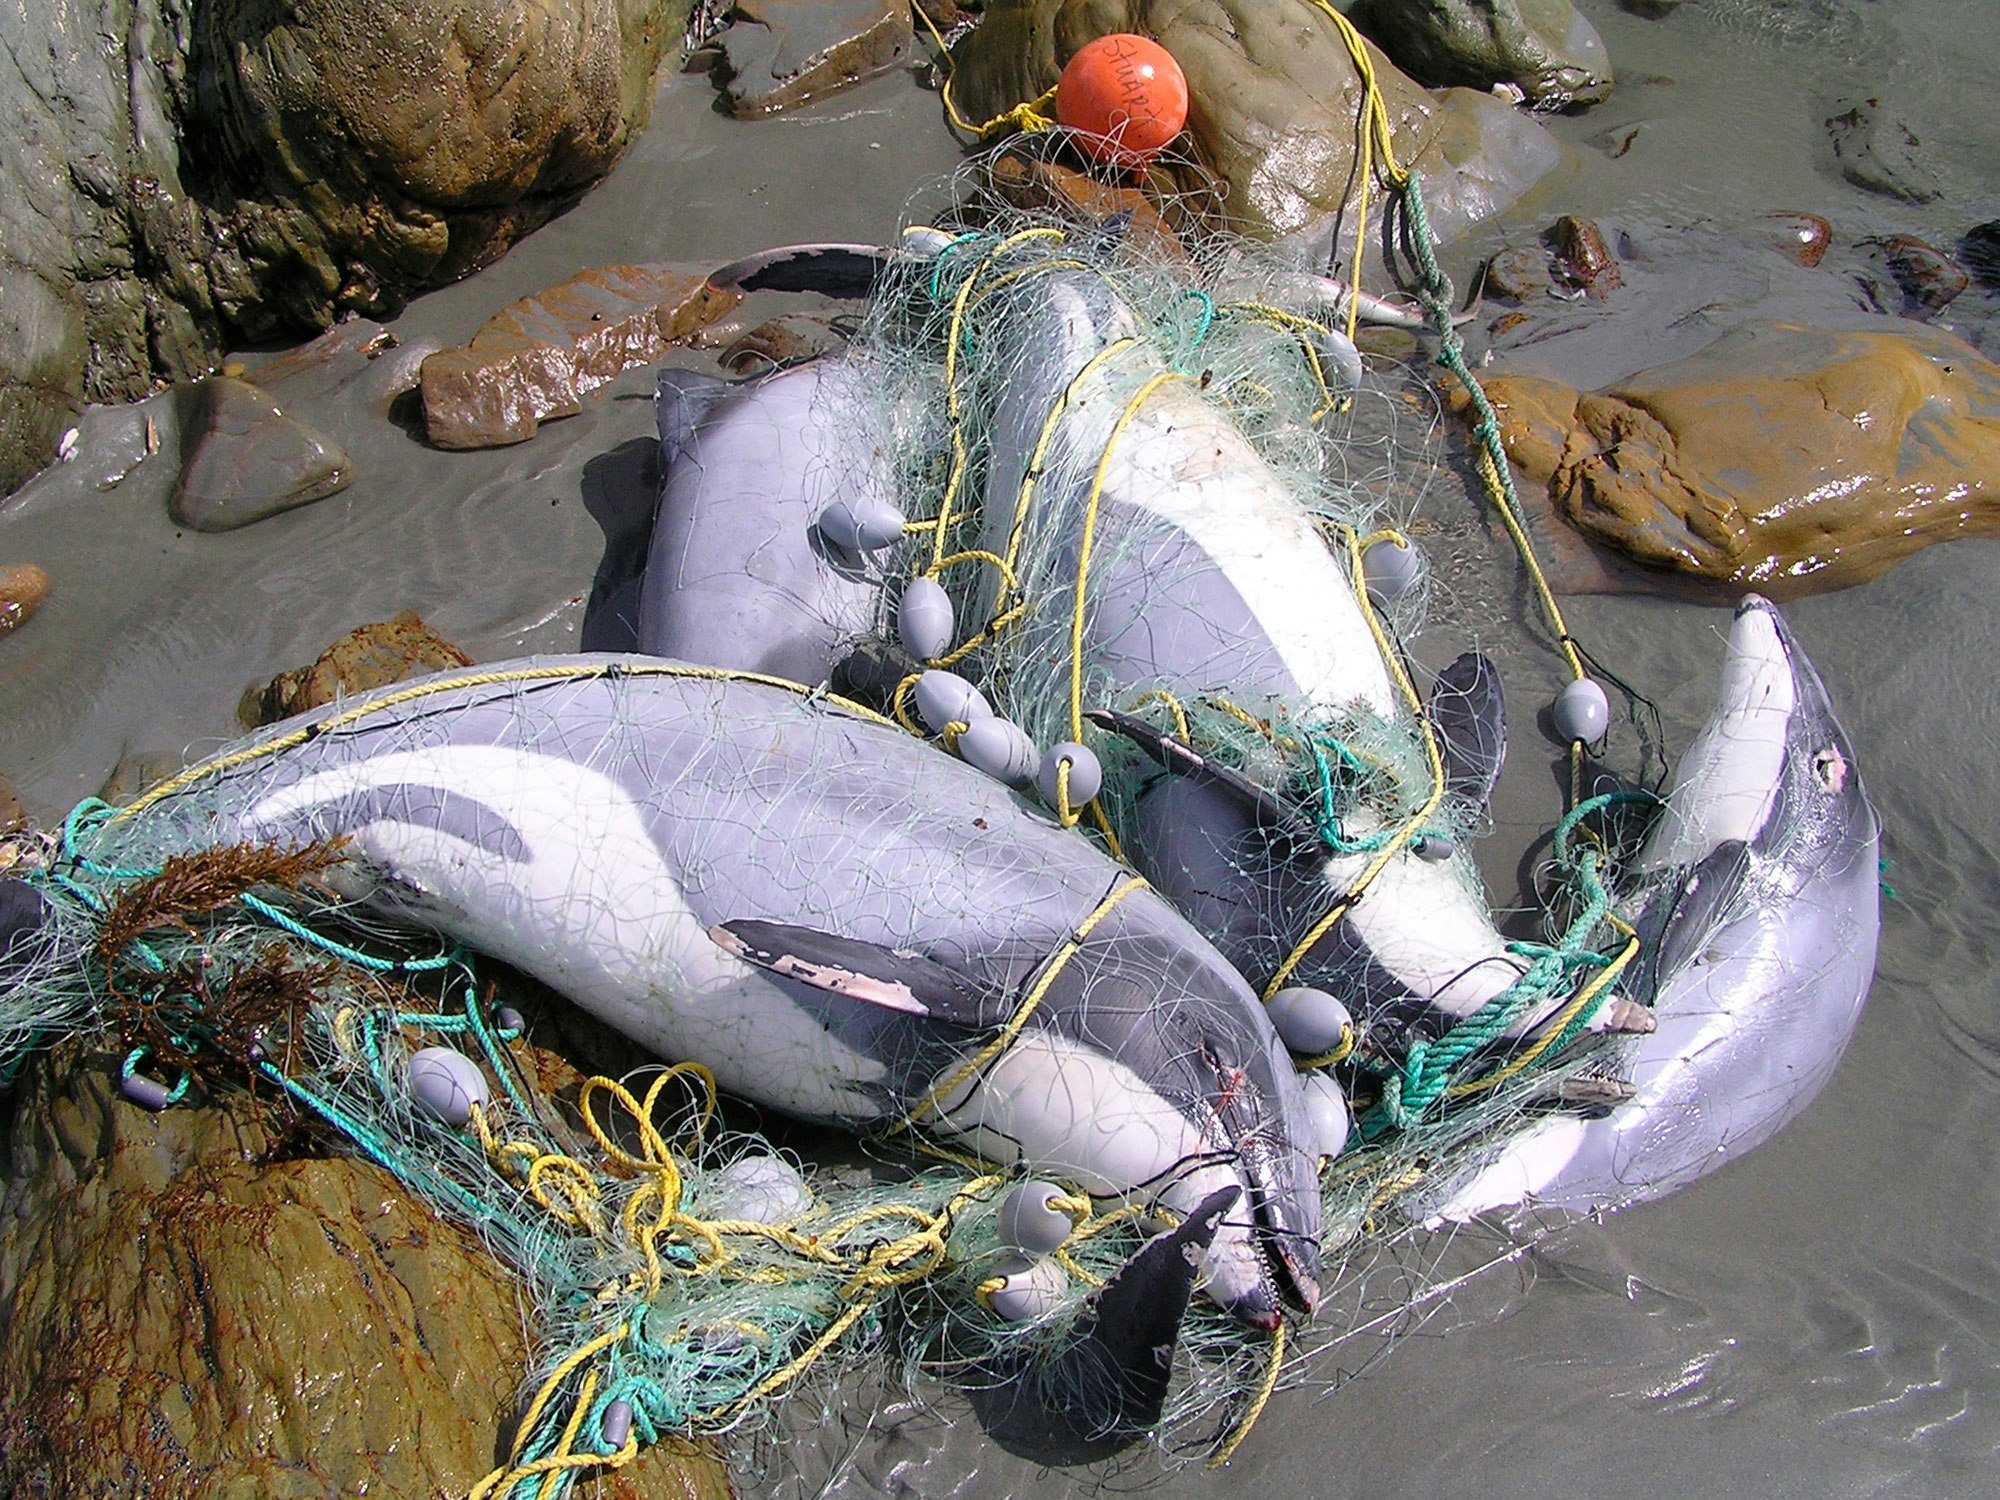 three dolphins on the beach tied up in a net